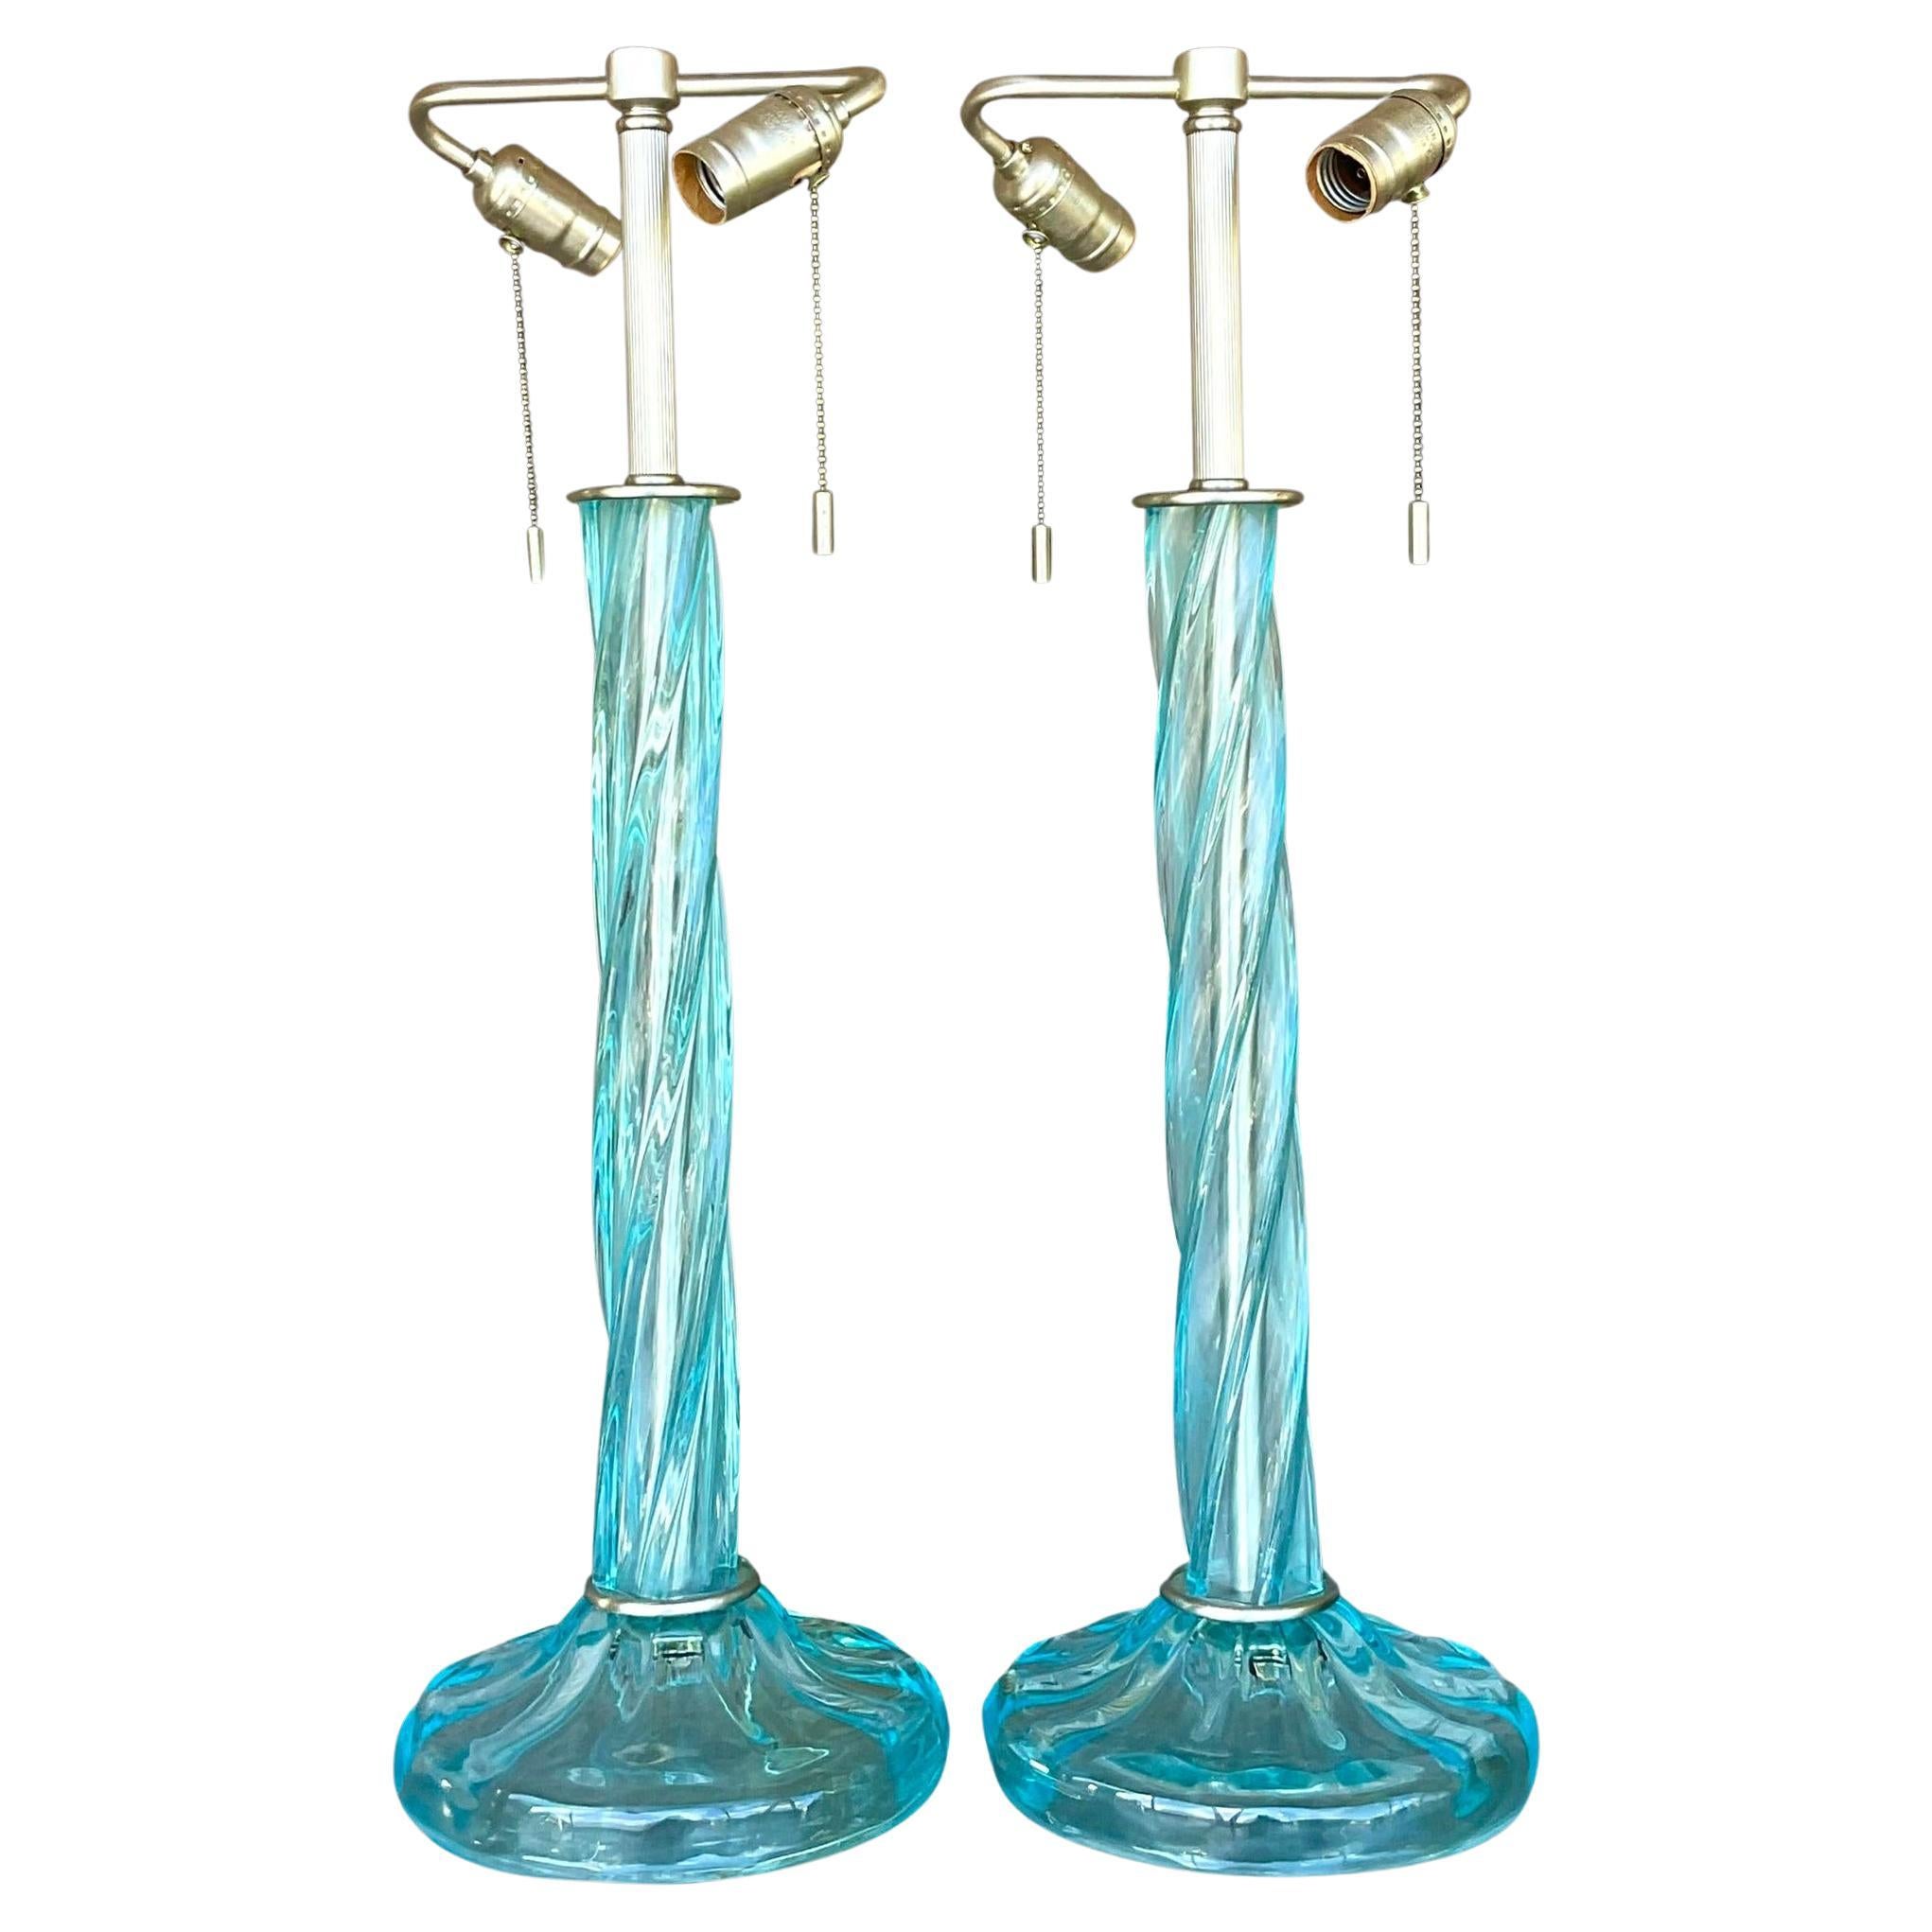 Vintage Boho Signed Donghia Twist Blown Glass Lamps - a Pair For Sale